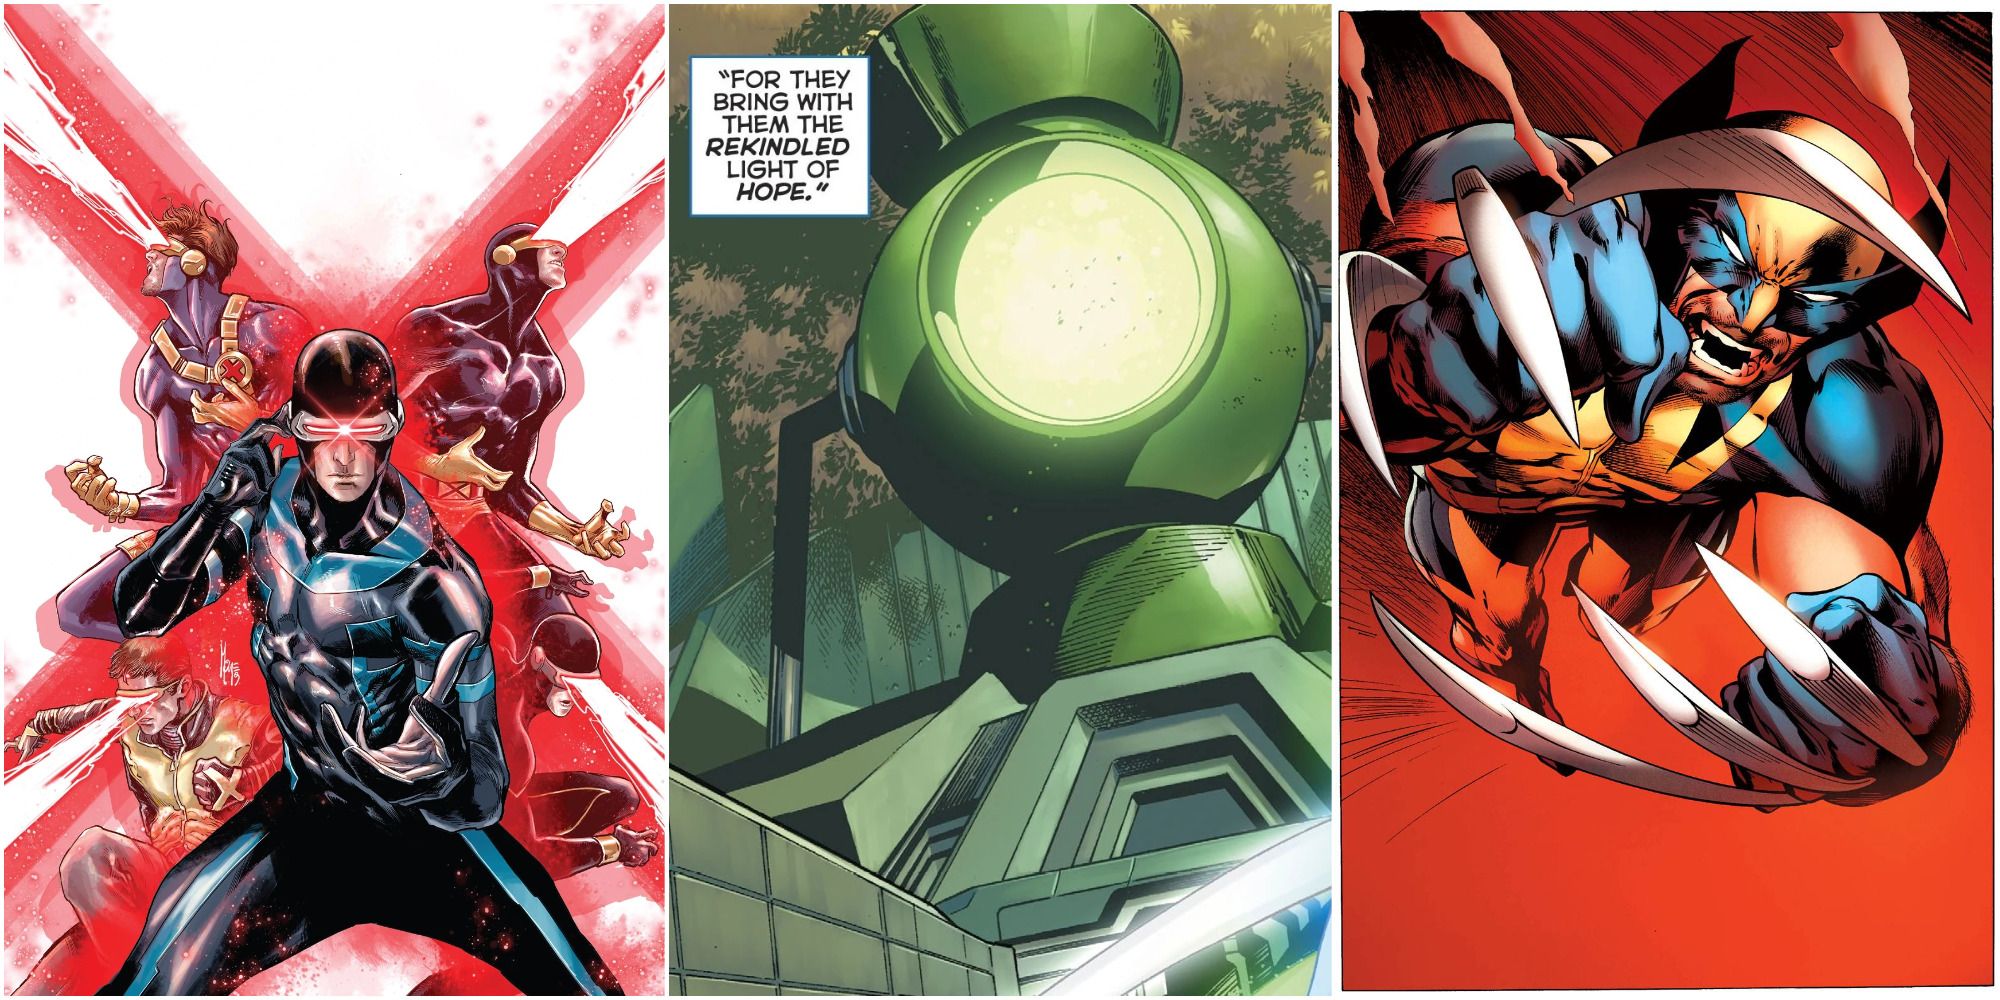 Cyclops, Green Lantern Central Power Battery, and Wolverine